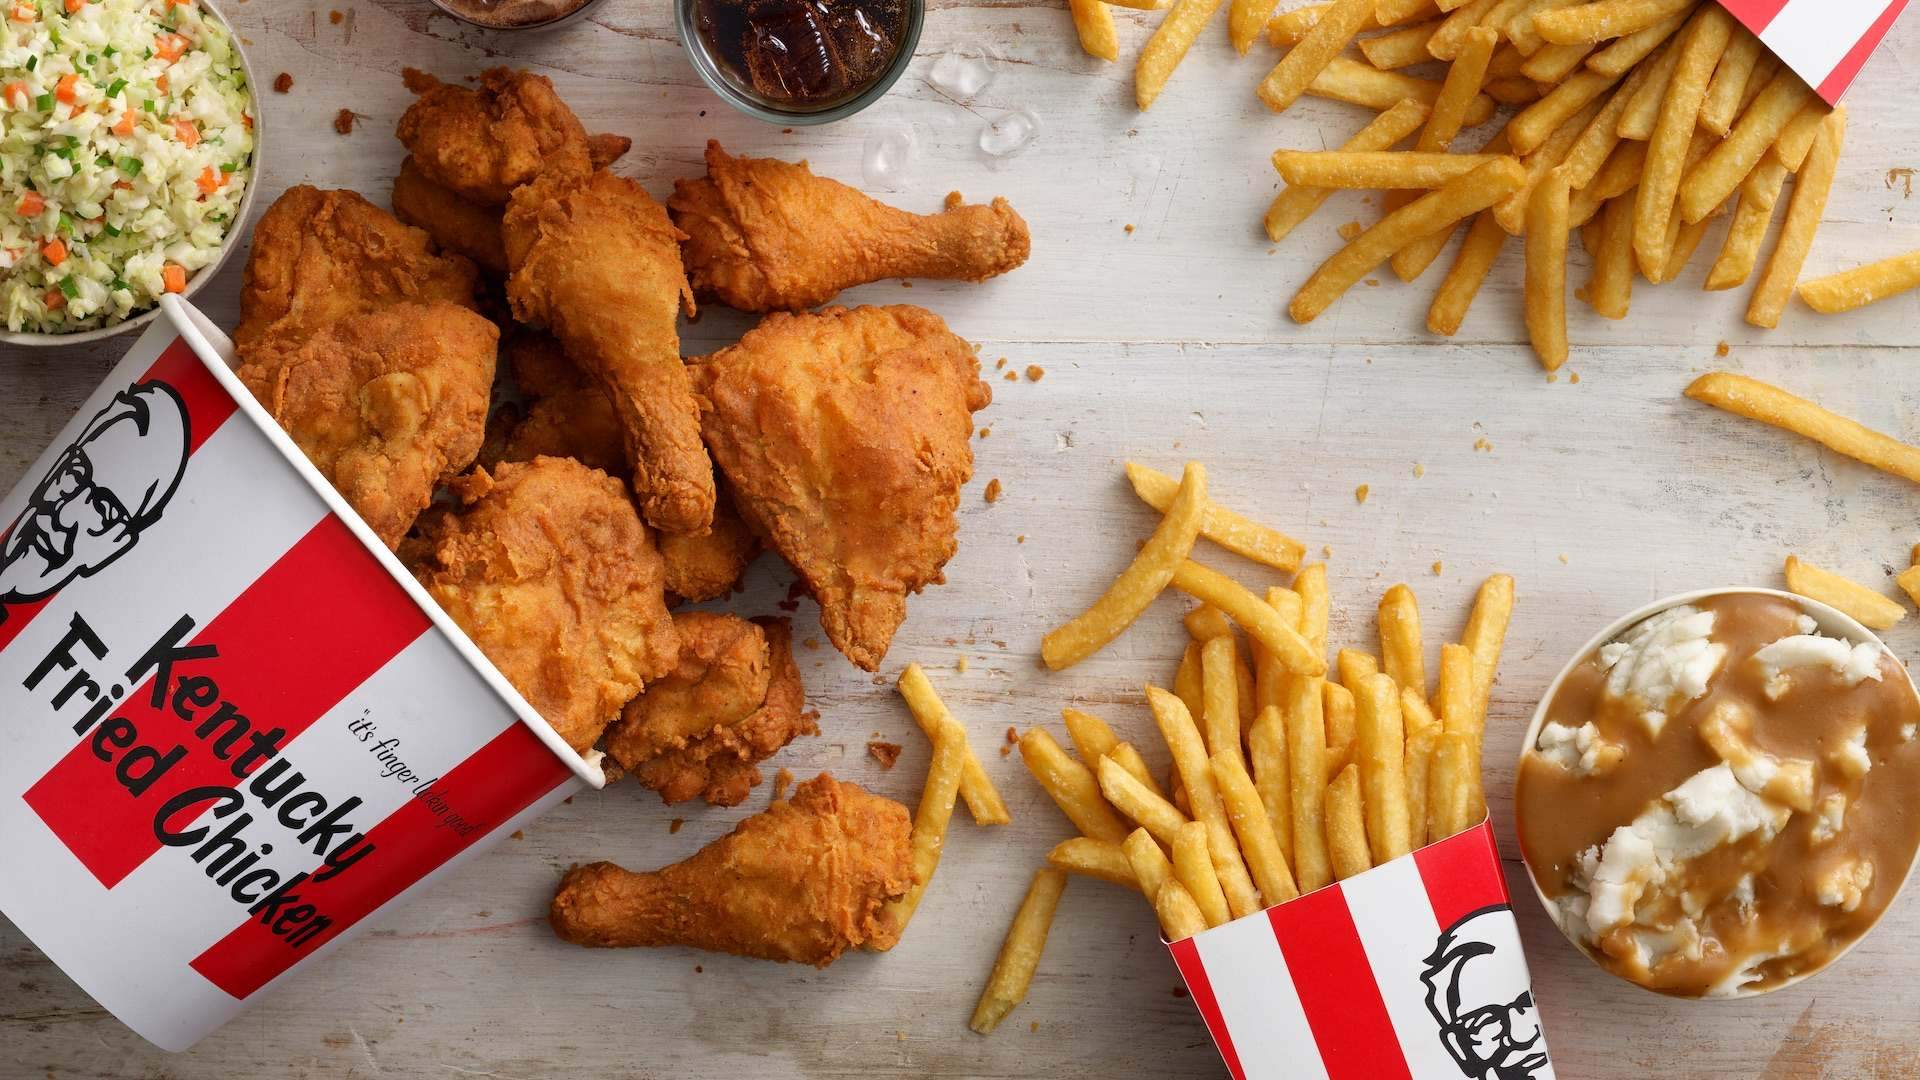 🍔 Plan a Dinner Party With Only Fast Food and We’ll Reveal Your Exact Age KFC Kentucky Fried Chicken